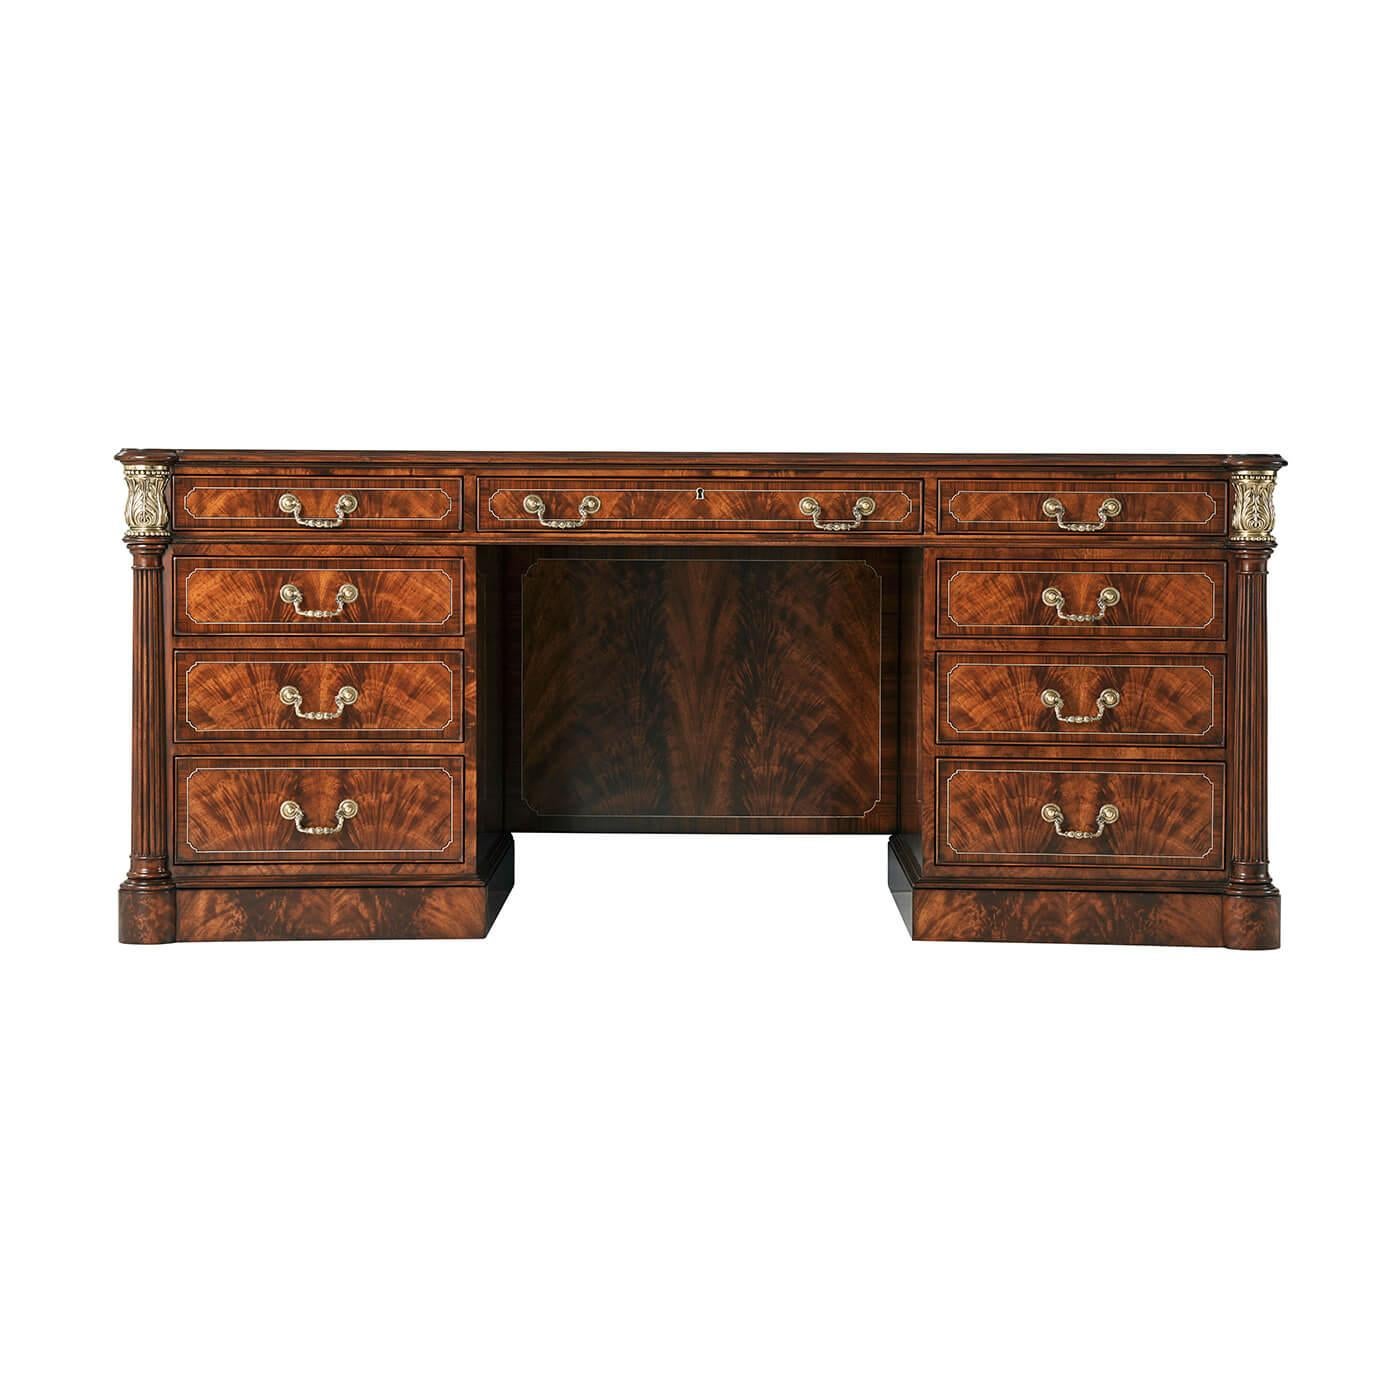 A fine George III style mahogany leather top pedestal desk, with a flame mahogany veneered and crossbanding to the top, with fine double stringing details, the gilt-tooled leather inset concave sided top with protruding rounded corners supported by